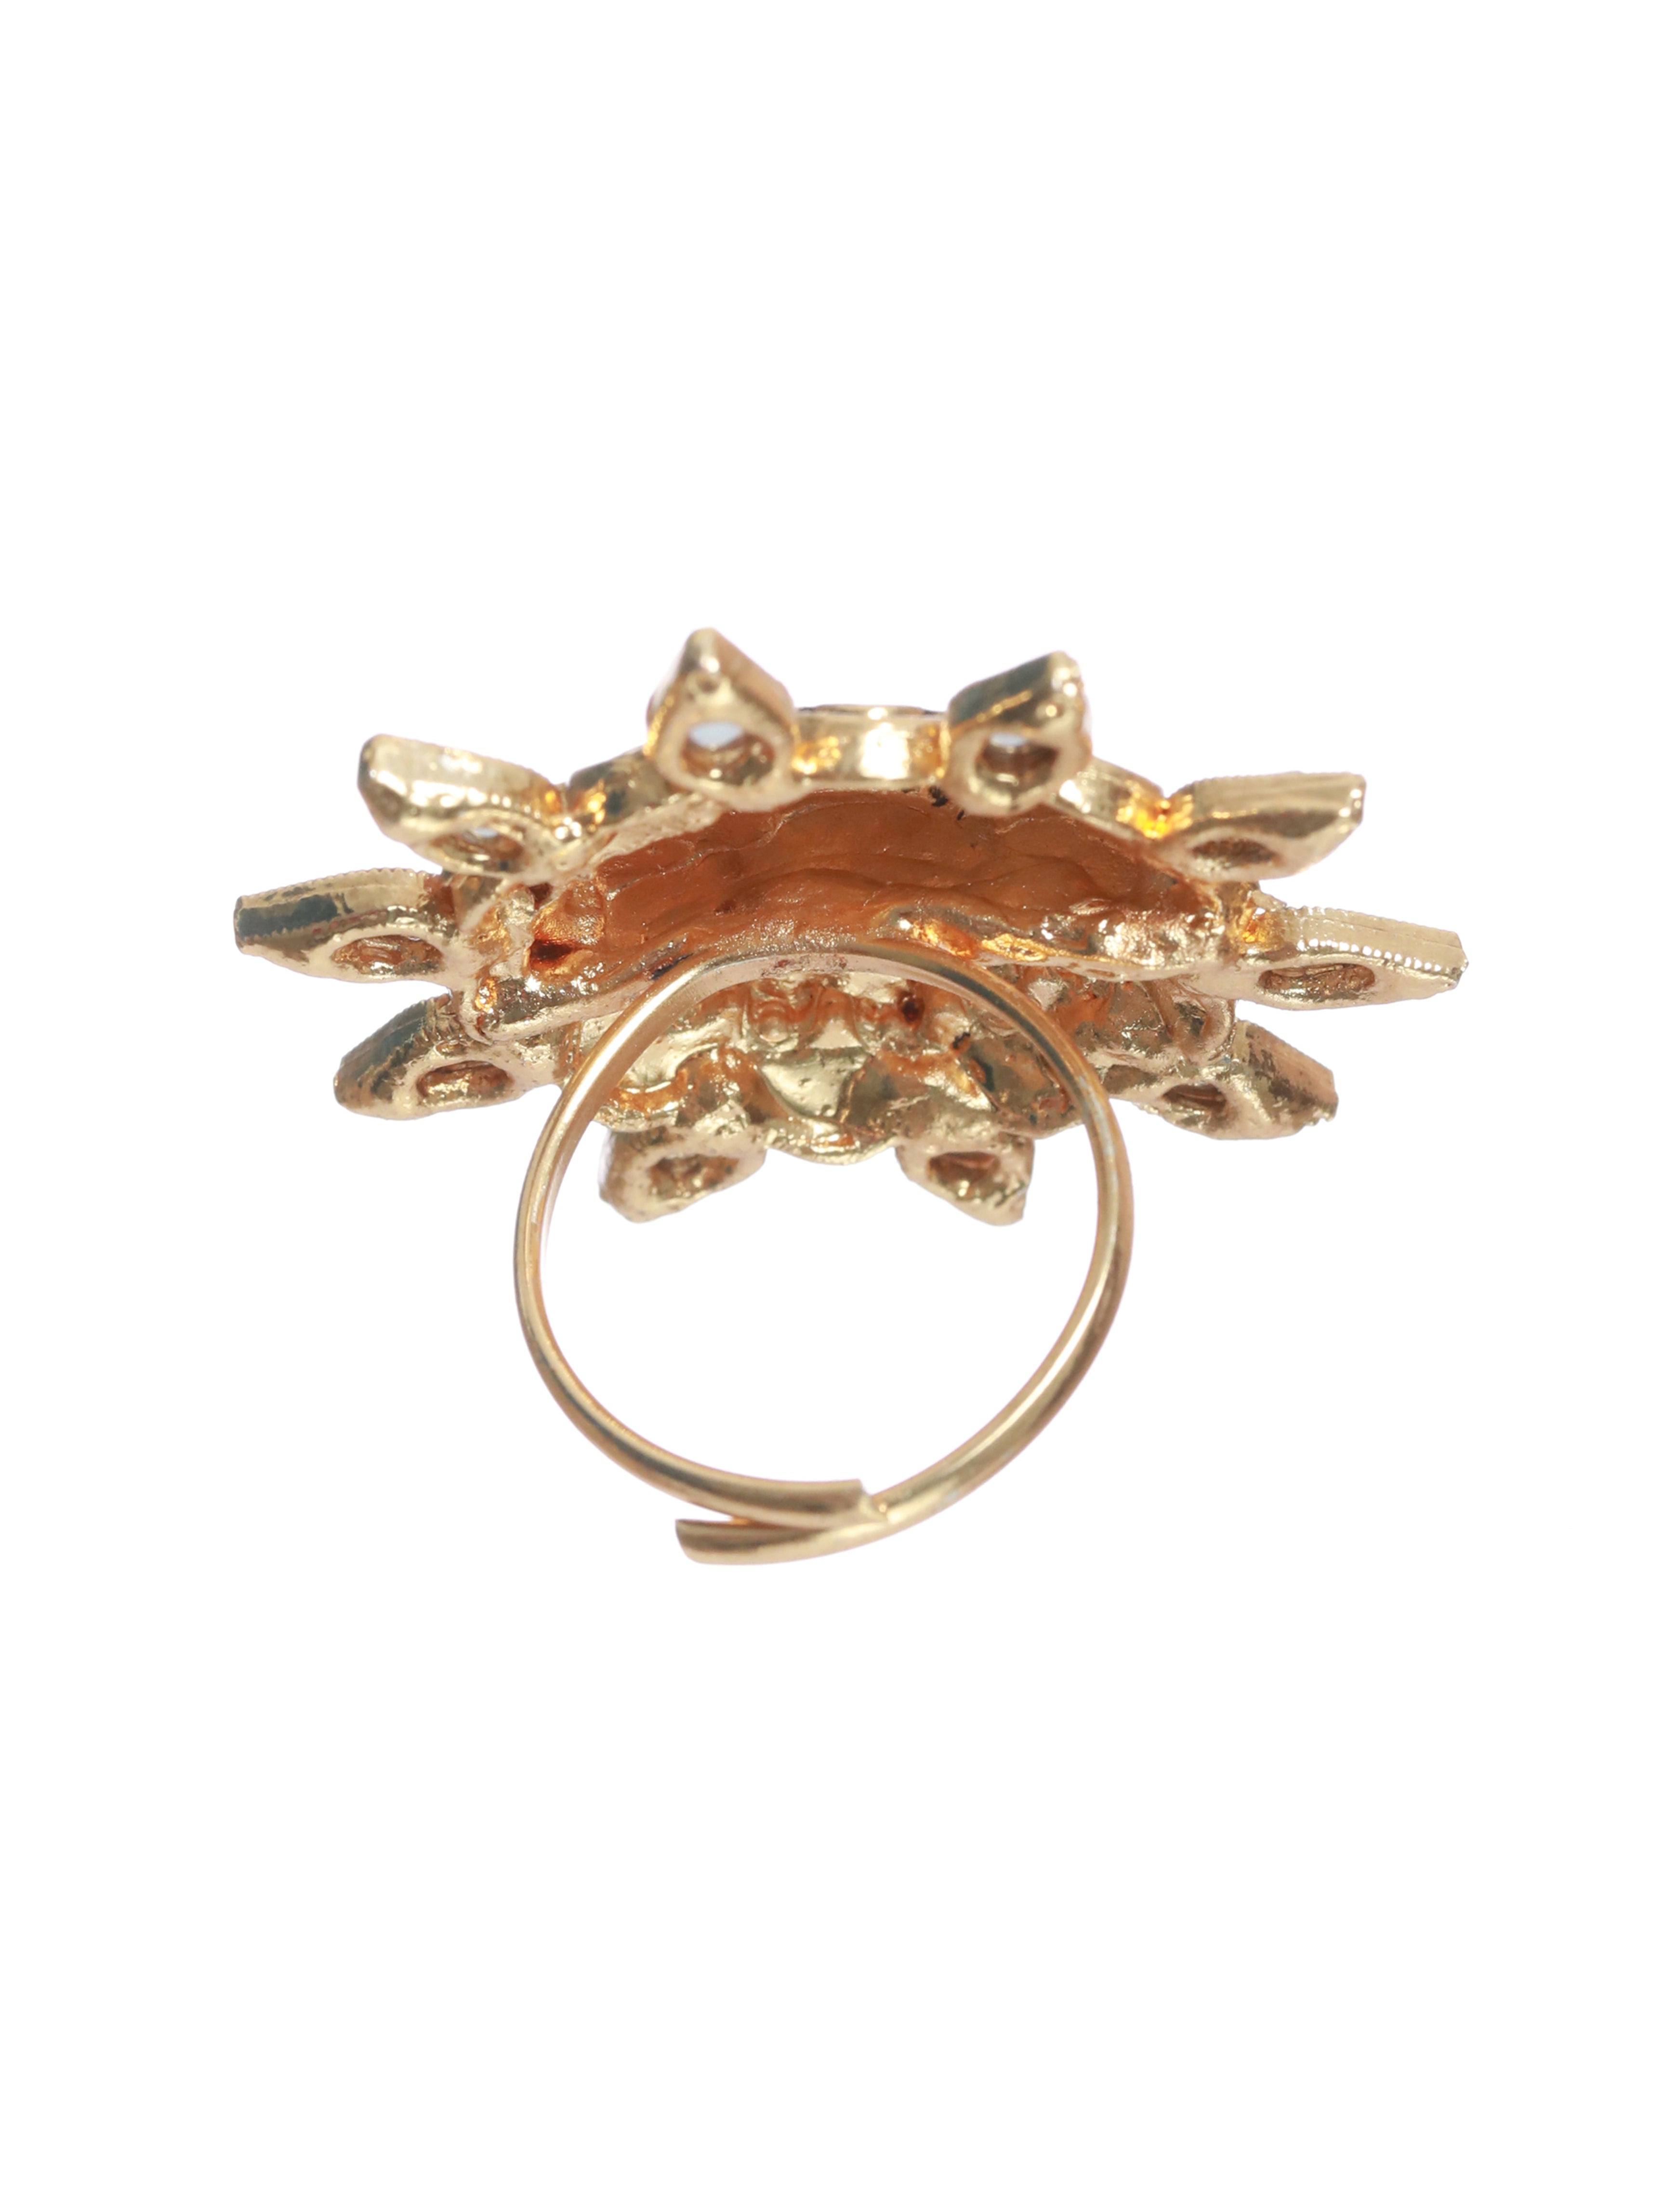 Gold-Plated Blue Enamelled White stone Studded Handcrafted Adjustable Finger Ring